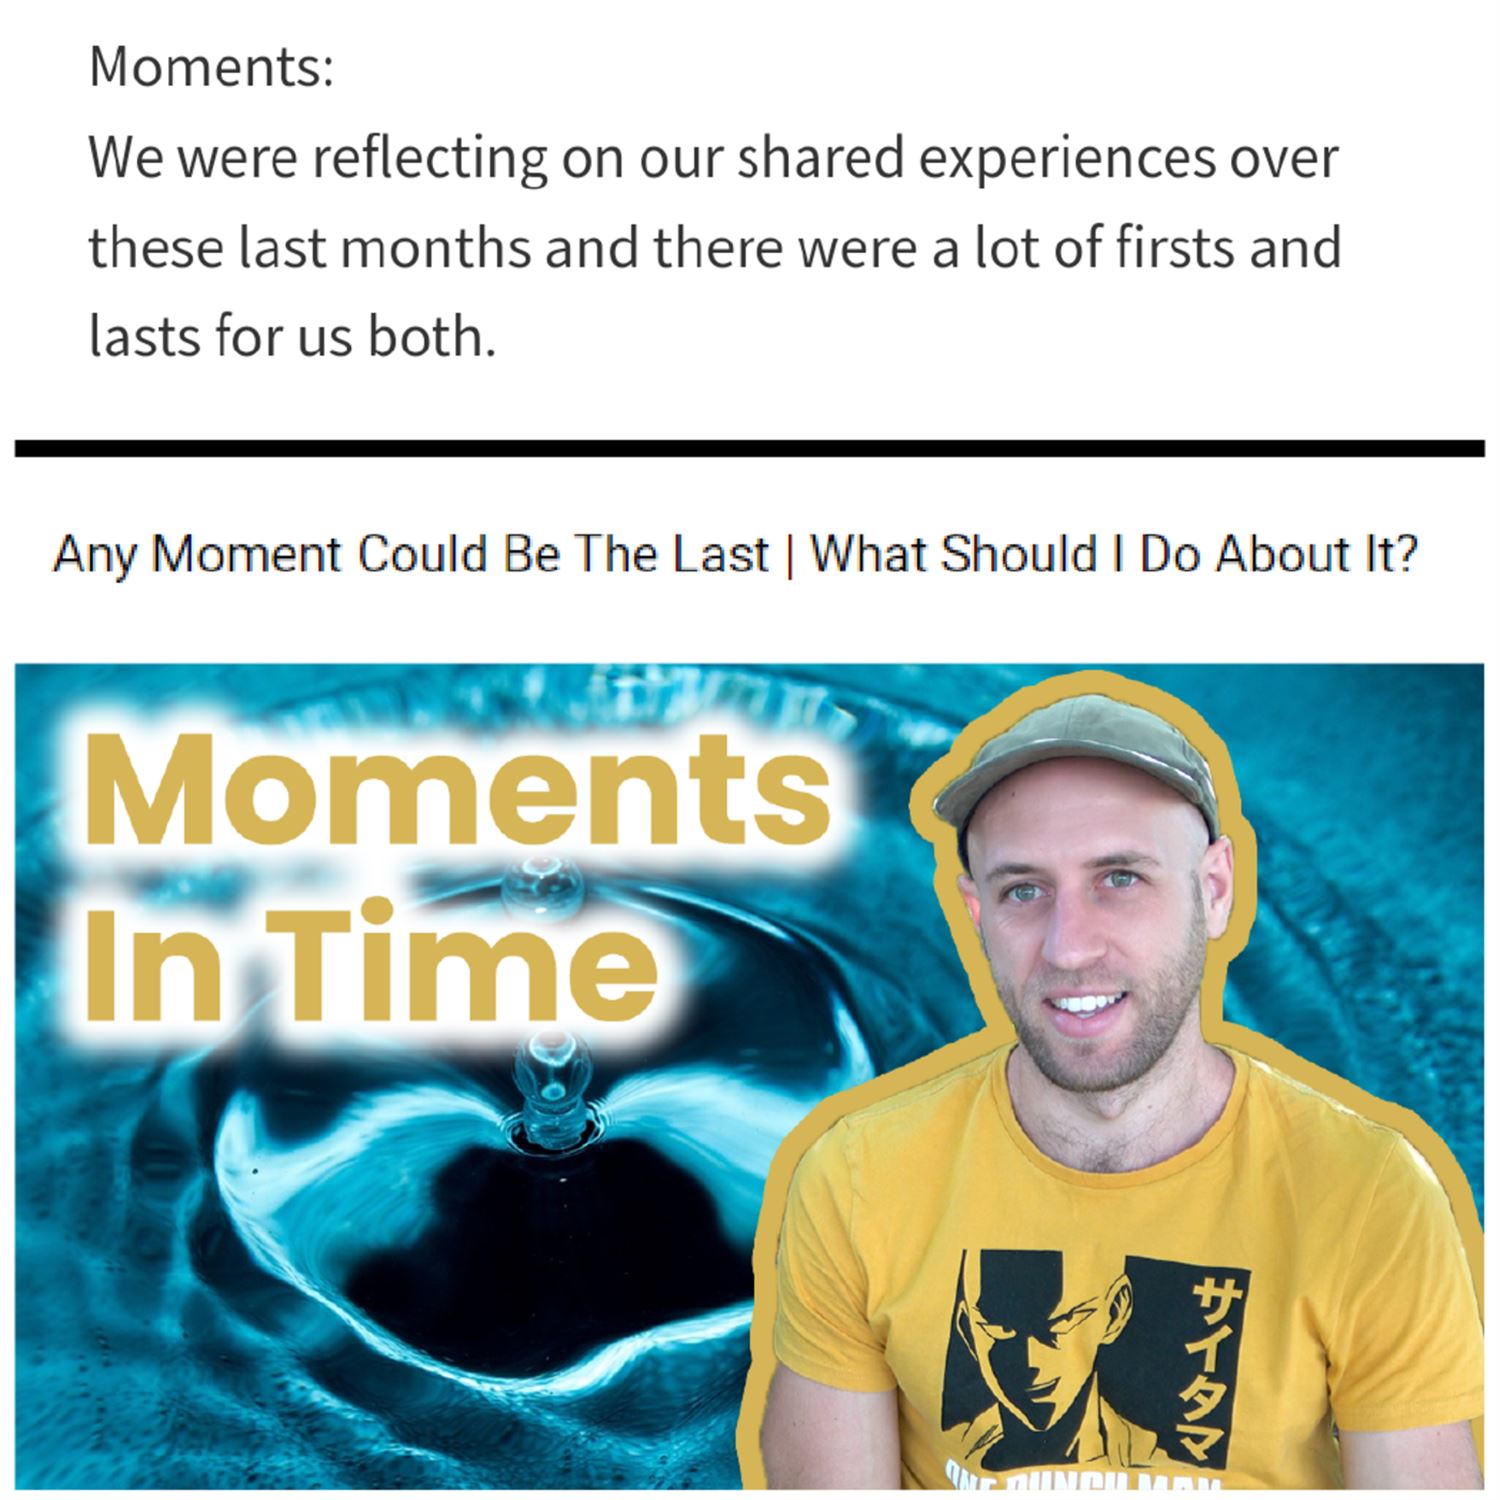 What's a moment?